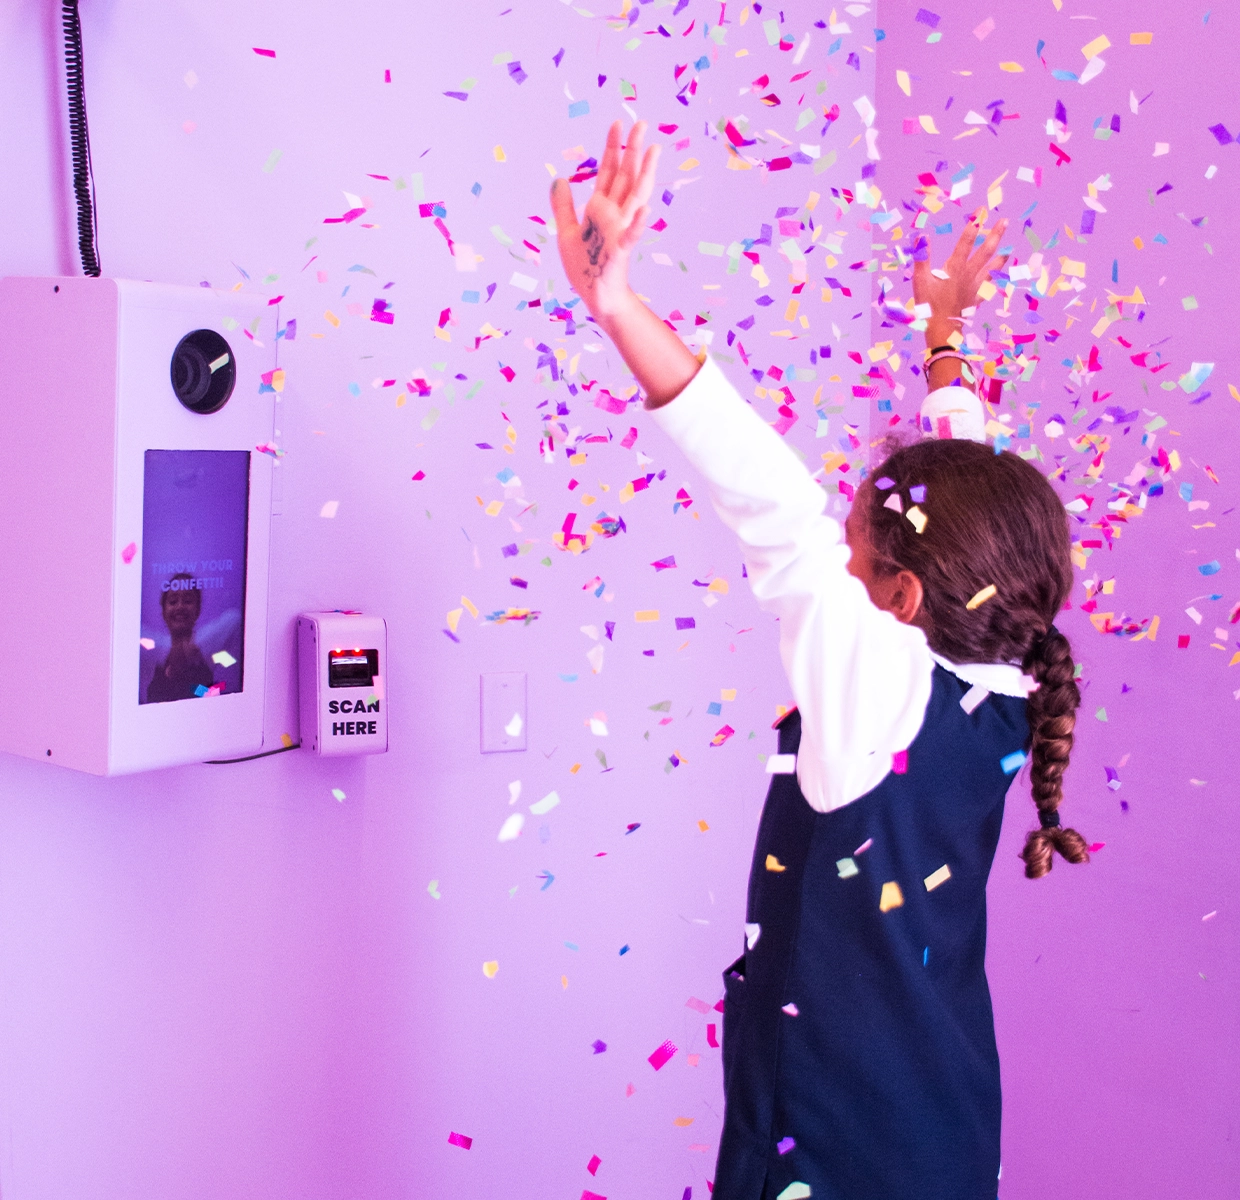 A girl throws confetti in the air, capturing a magical moment against a purple backdrop with a QR code for photo retrieval at the Color Factory